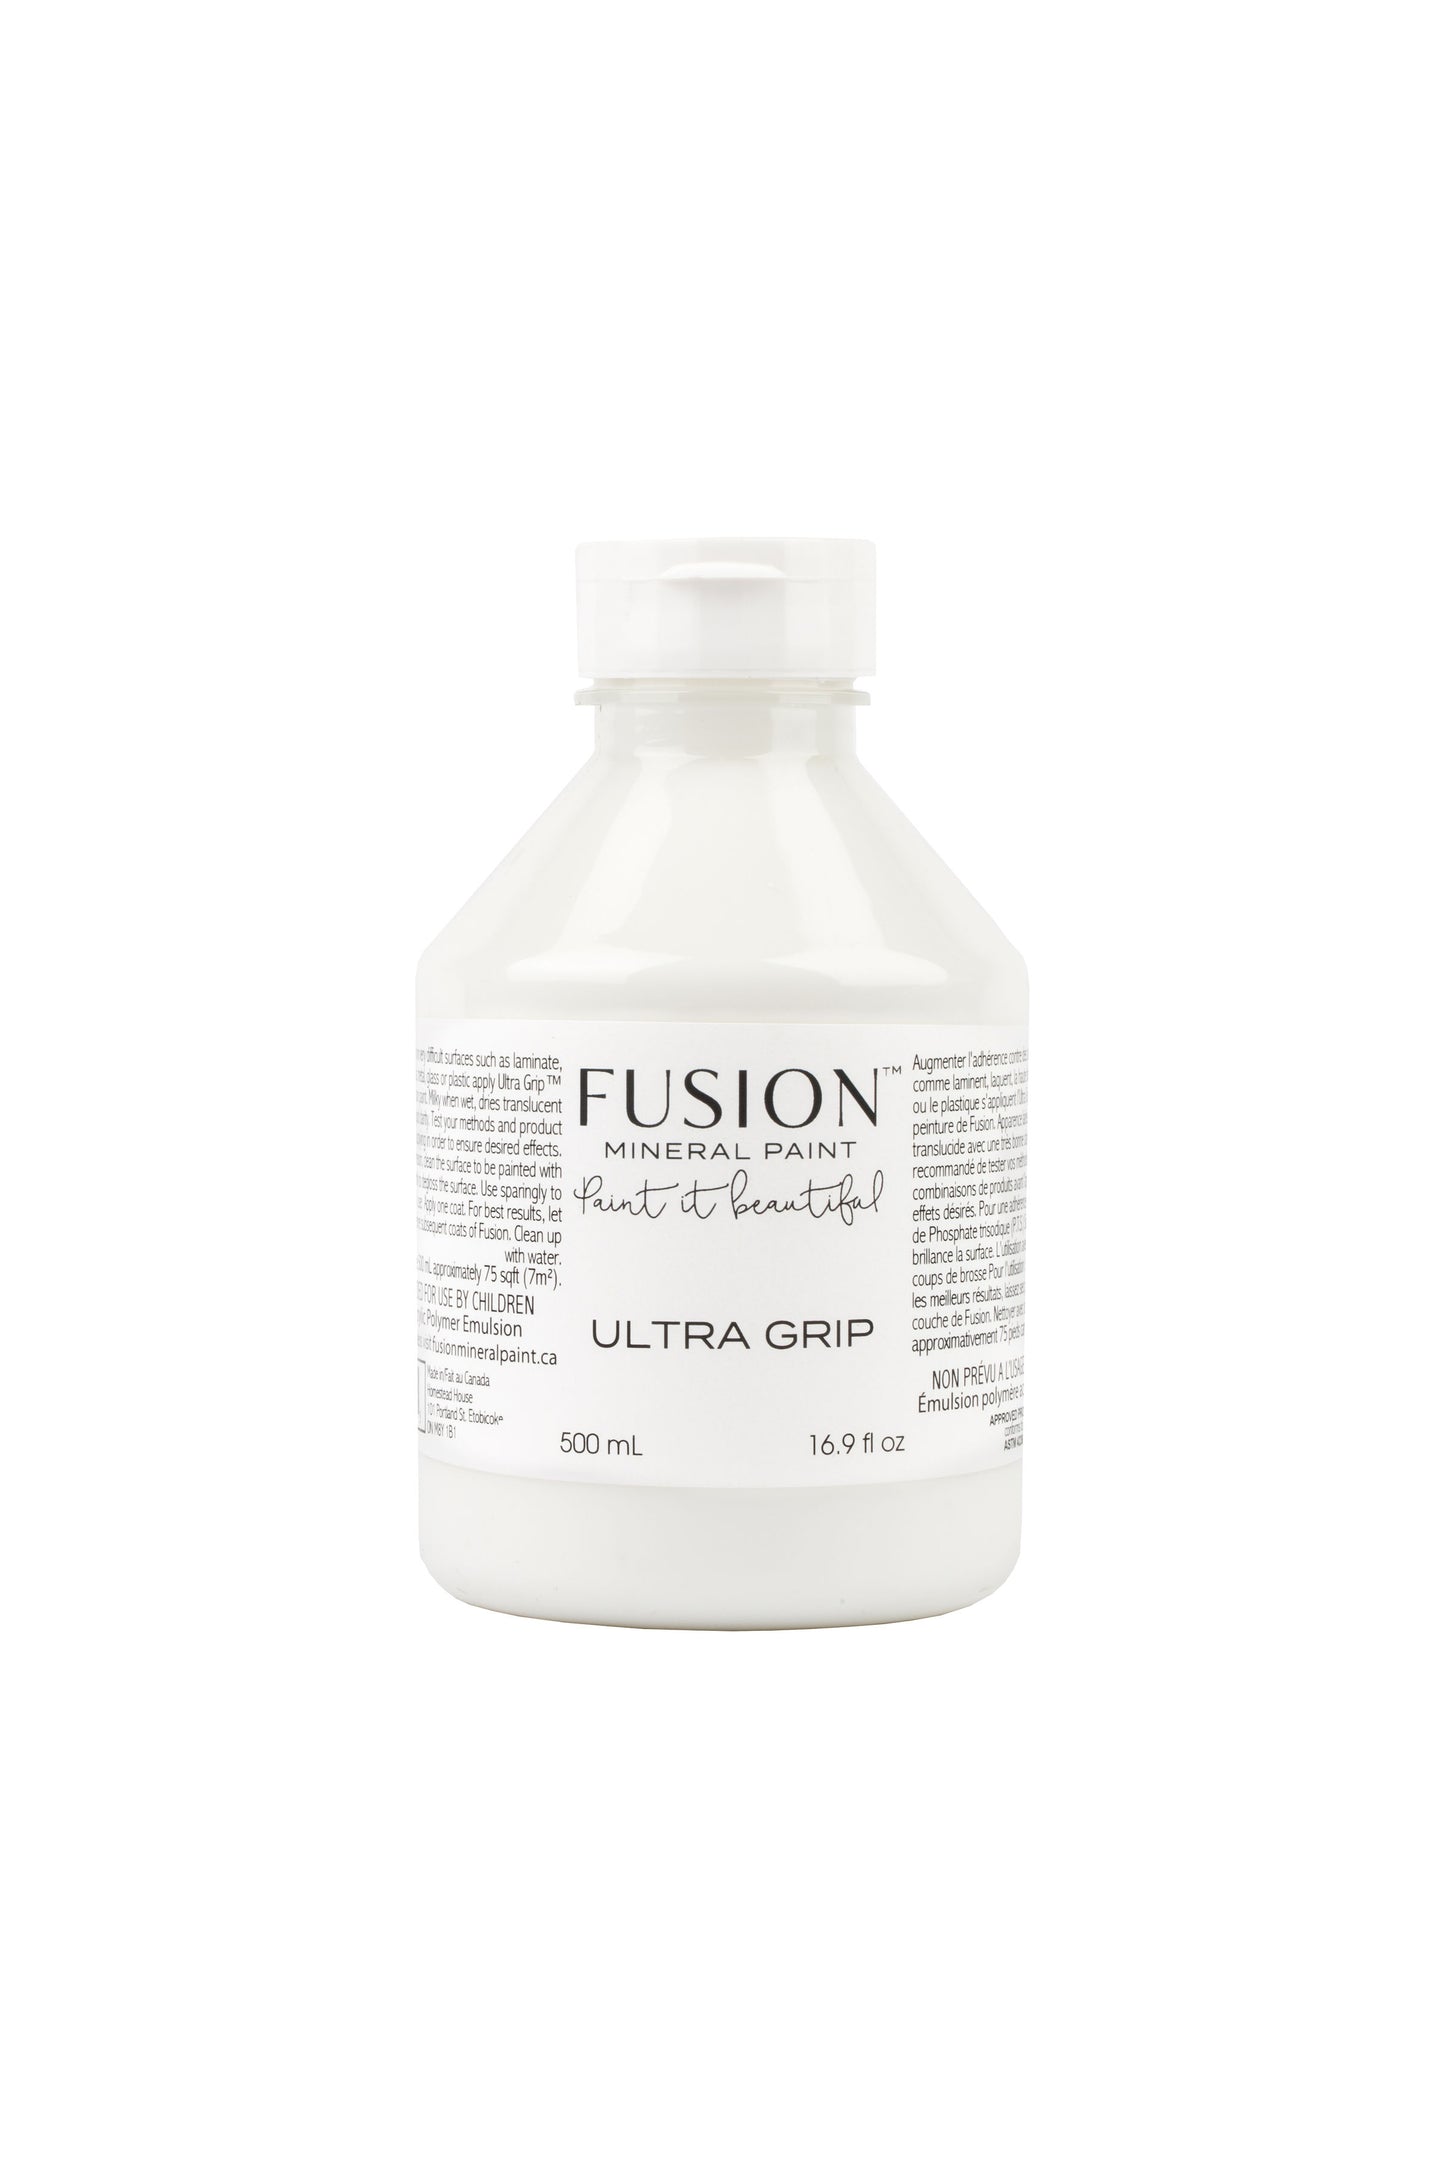 Antique Store Mississauga, 500 ml Ultra Grip Fusion Mineral Paint